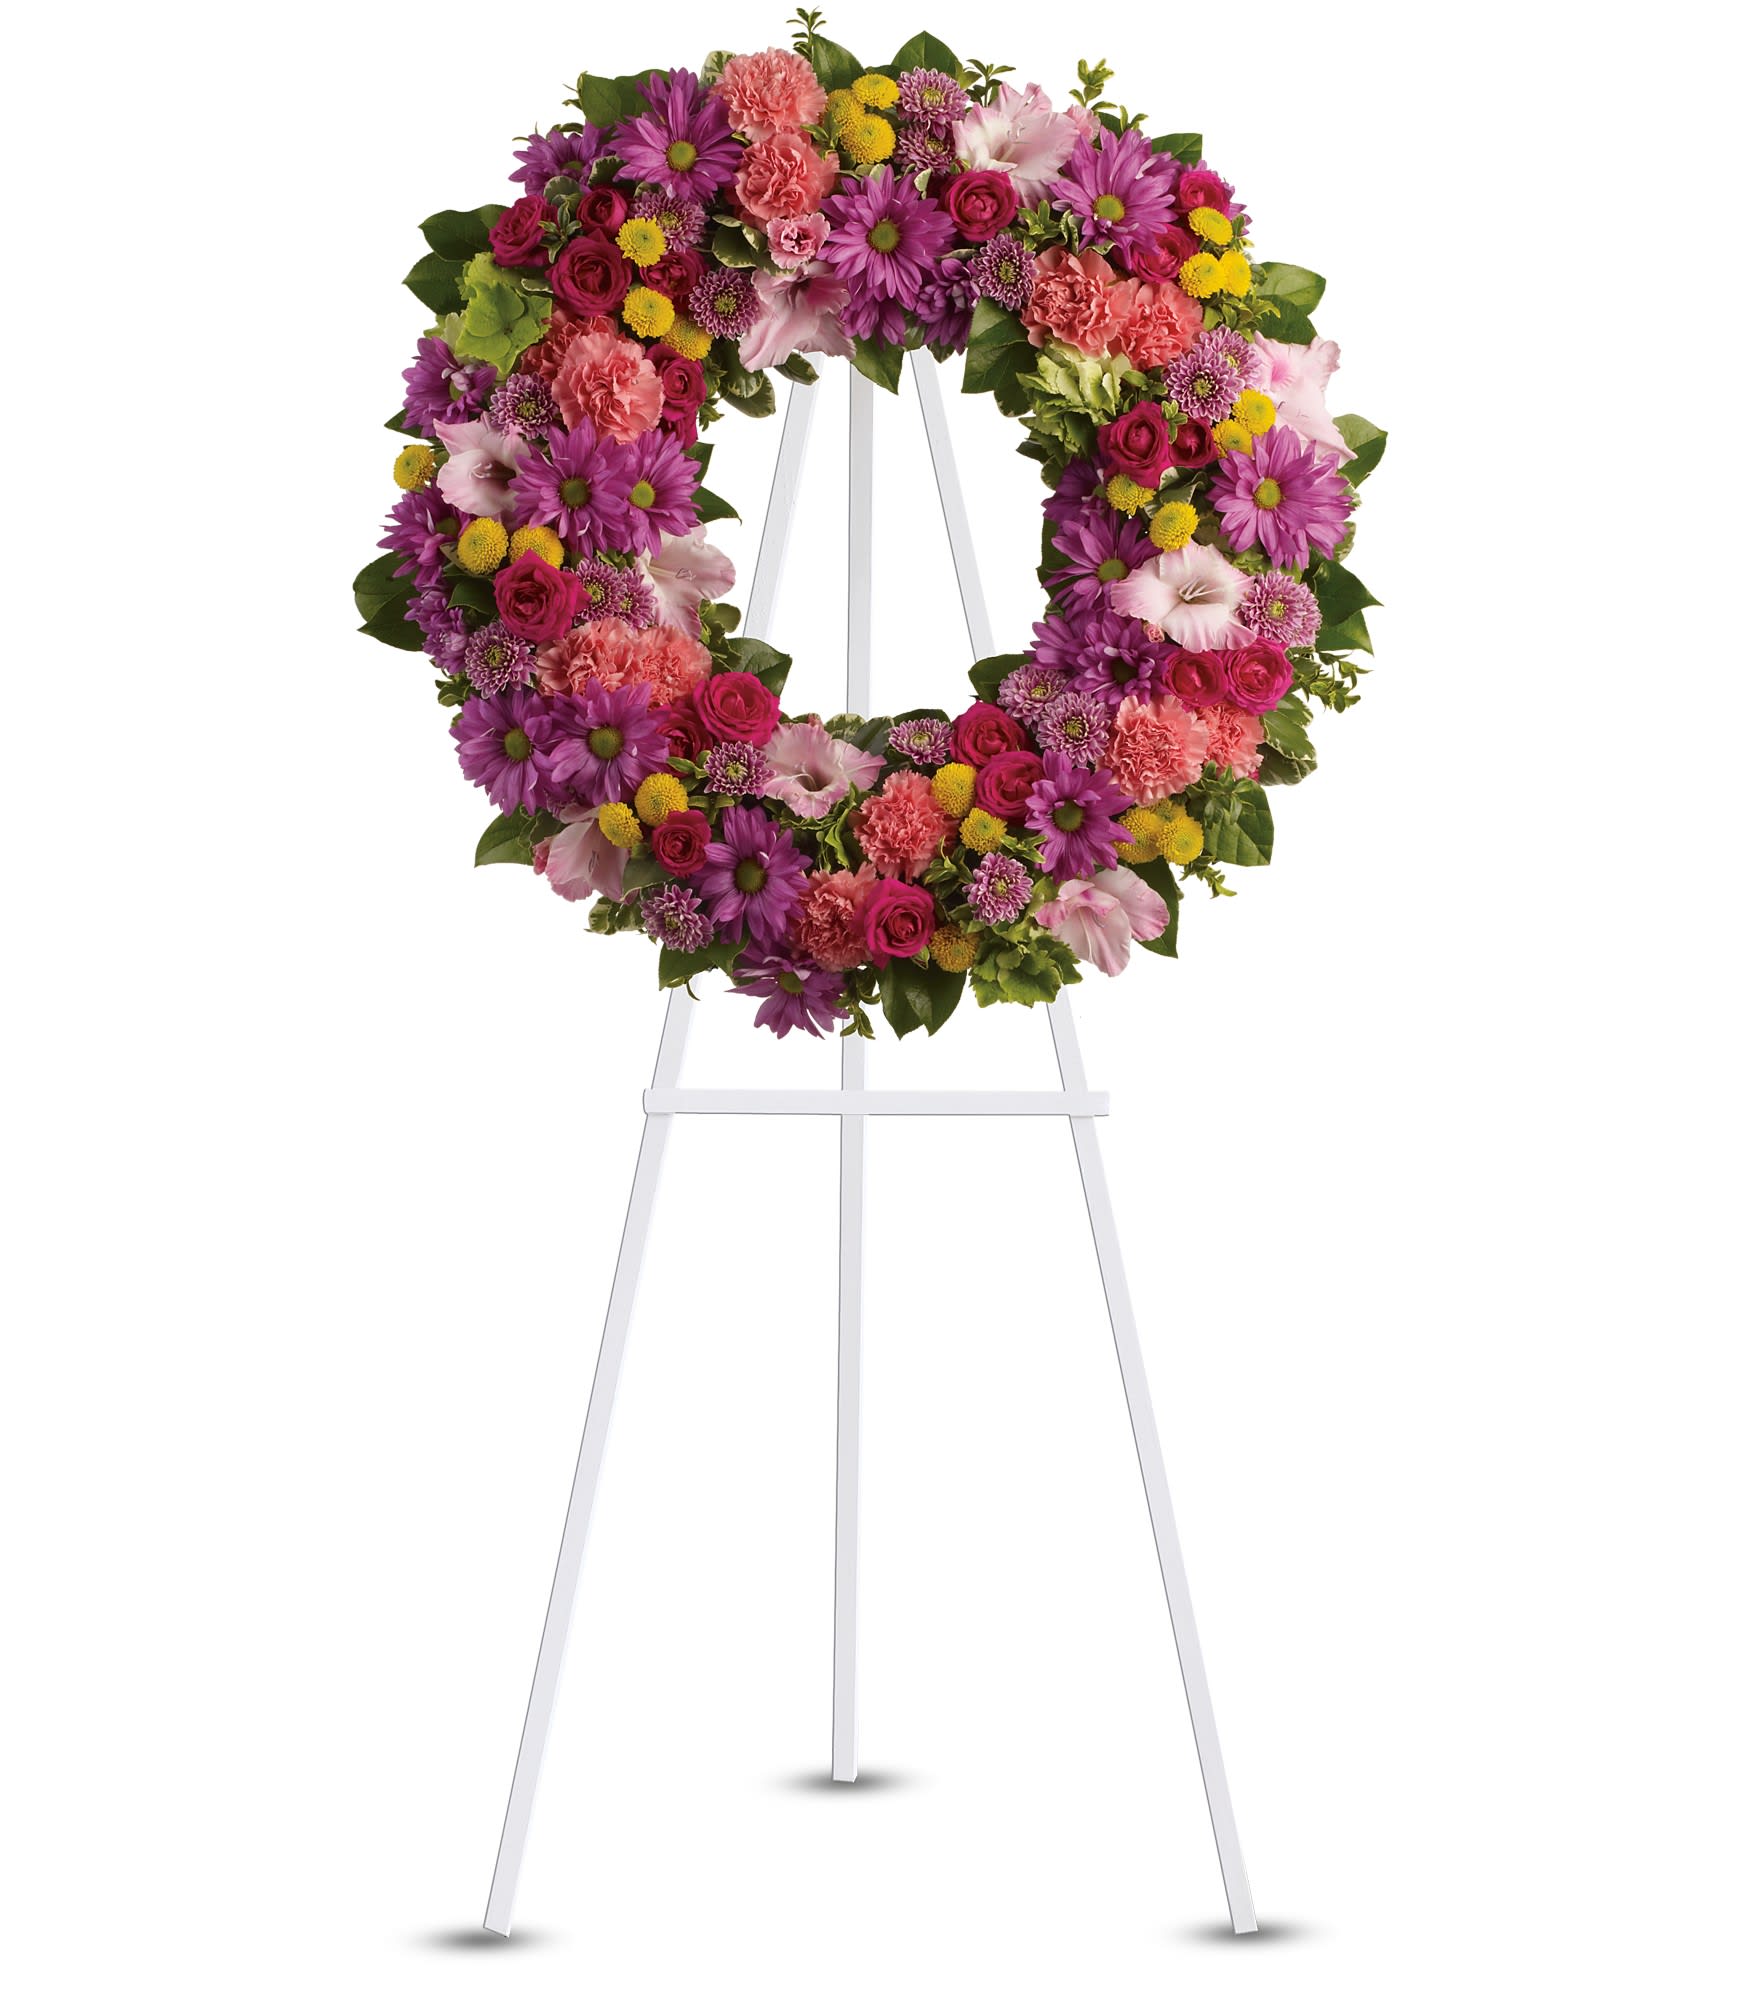 Ringed by Love by Teleflora - The memory of brighter days is always a comfort to those in mourning. This lovely wreath will display your compassion beautifully. 